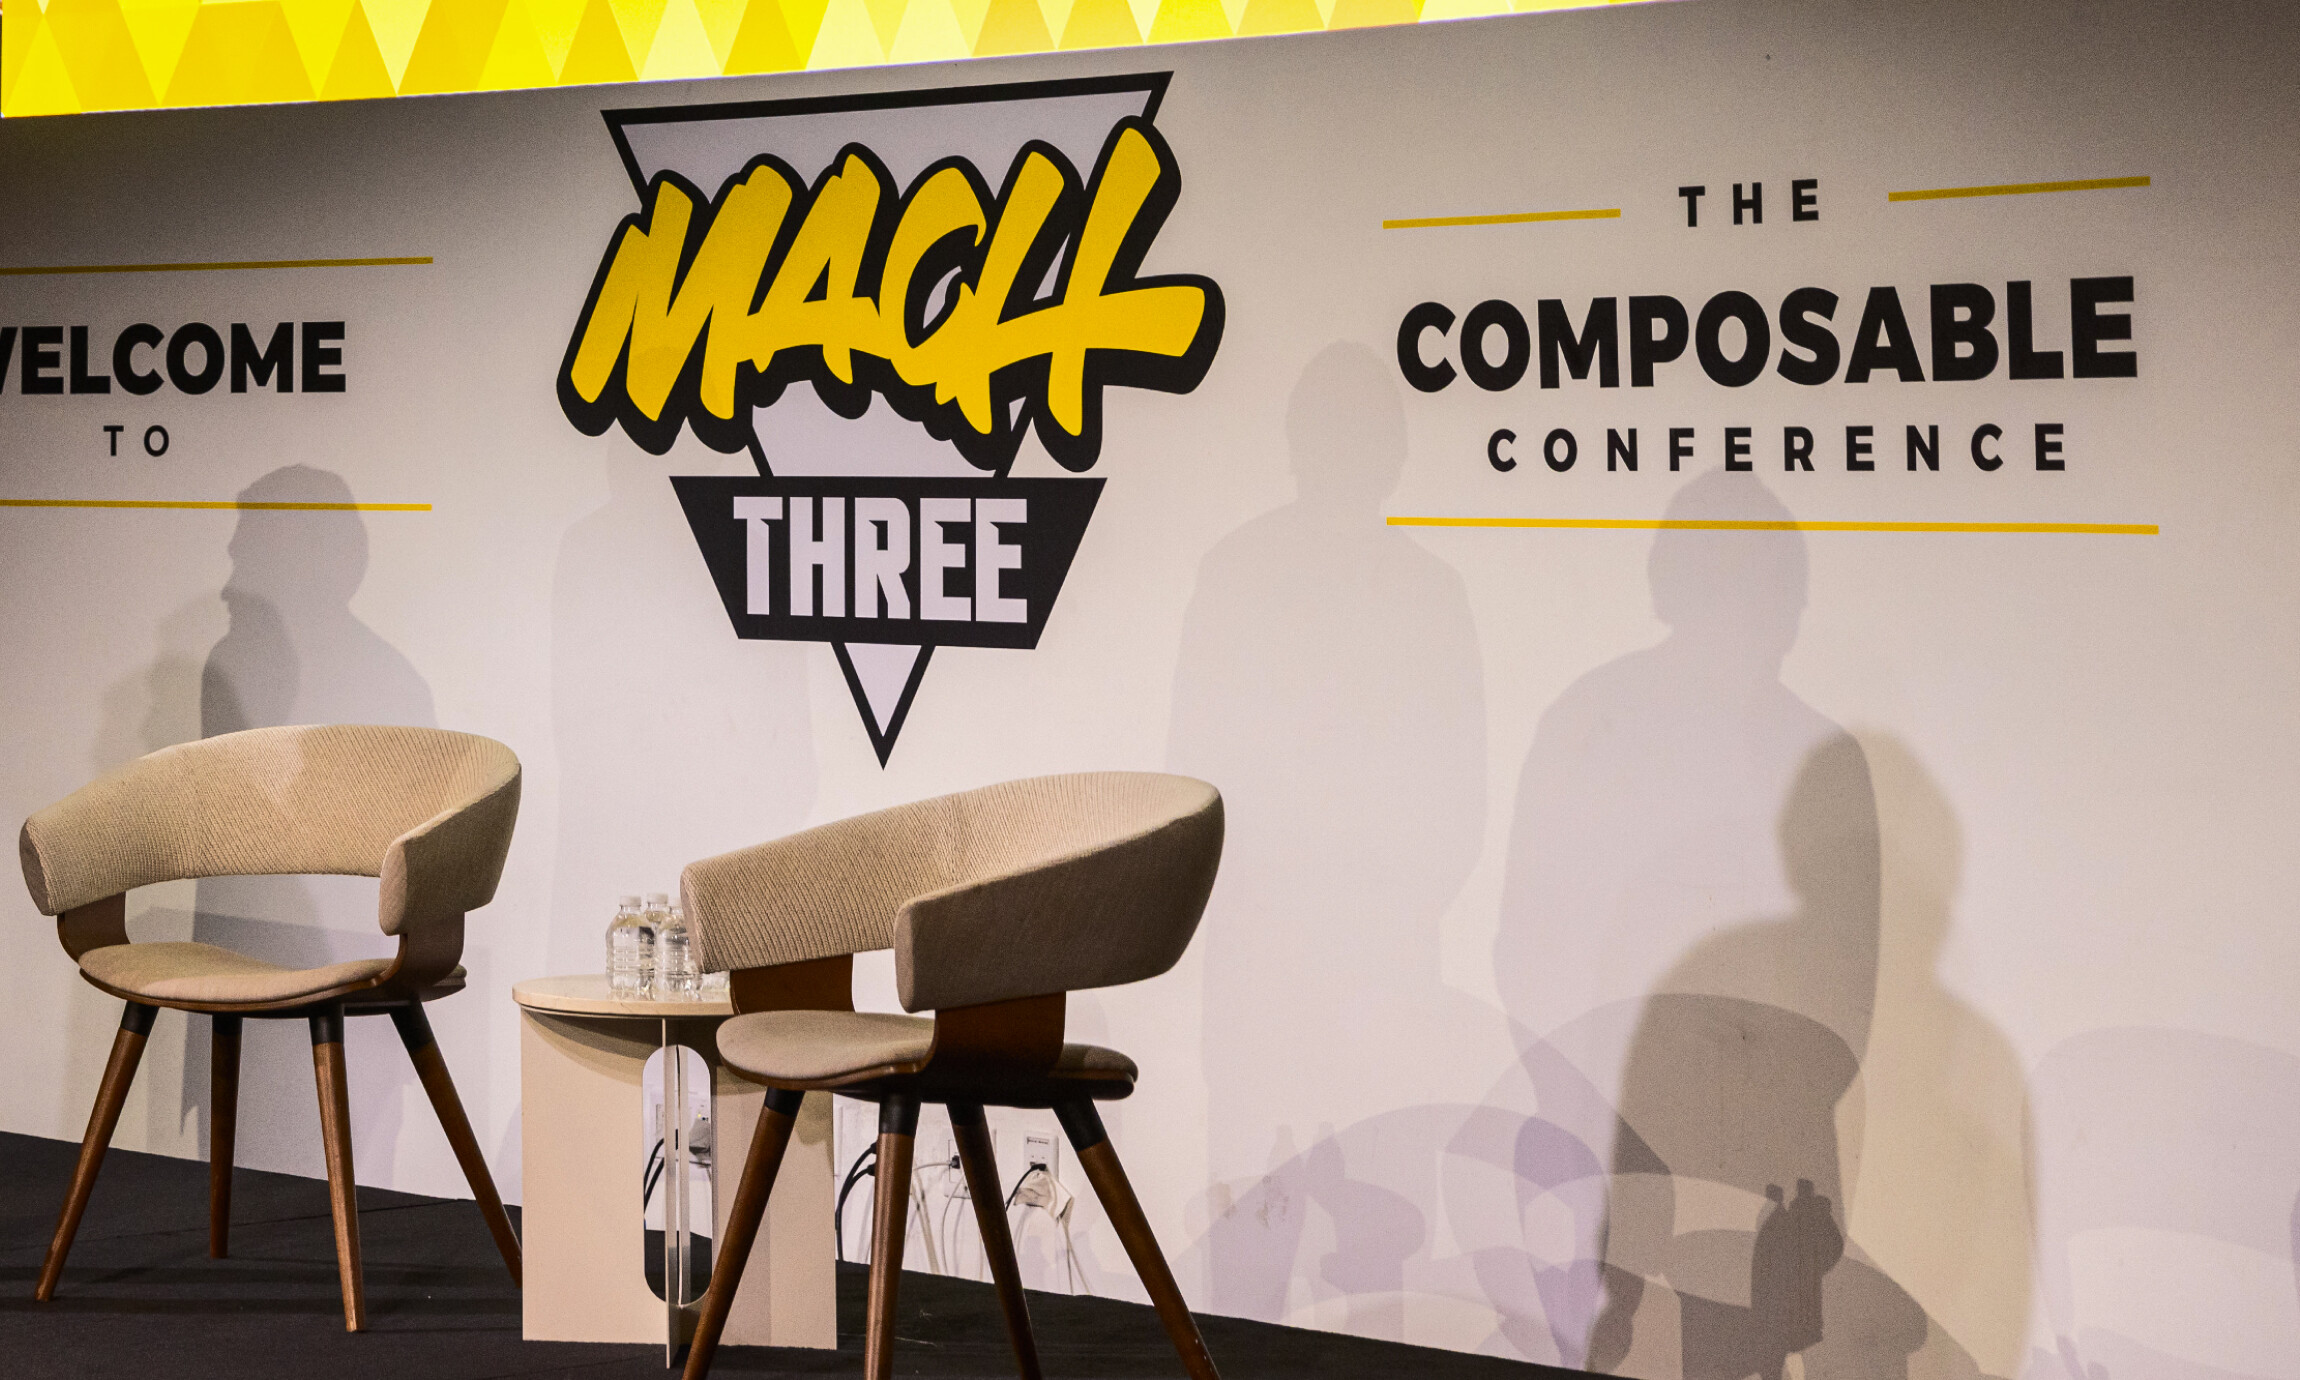 Making an impact with MACH and composable commerce: 3 key takeaways from MACH 3